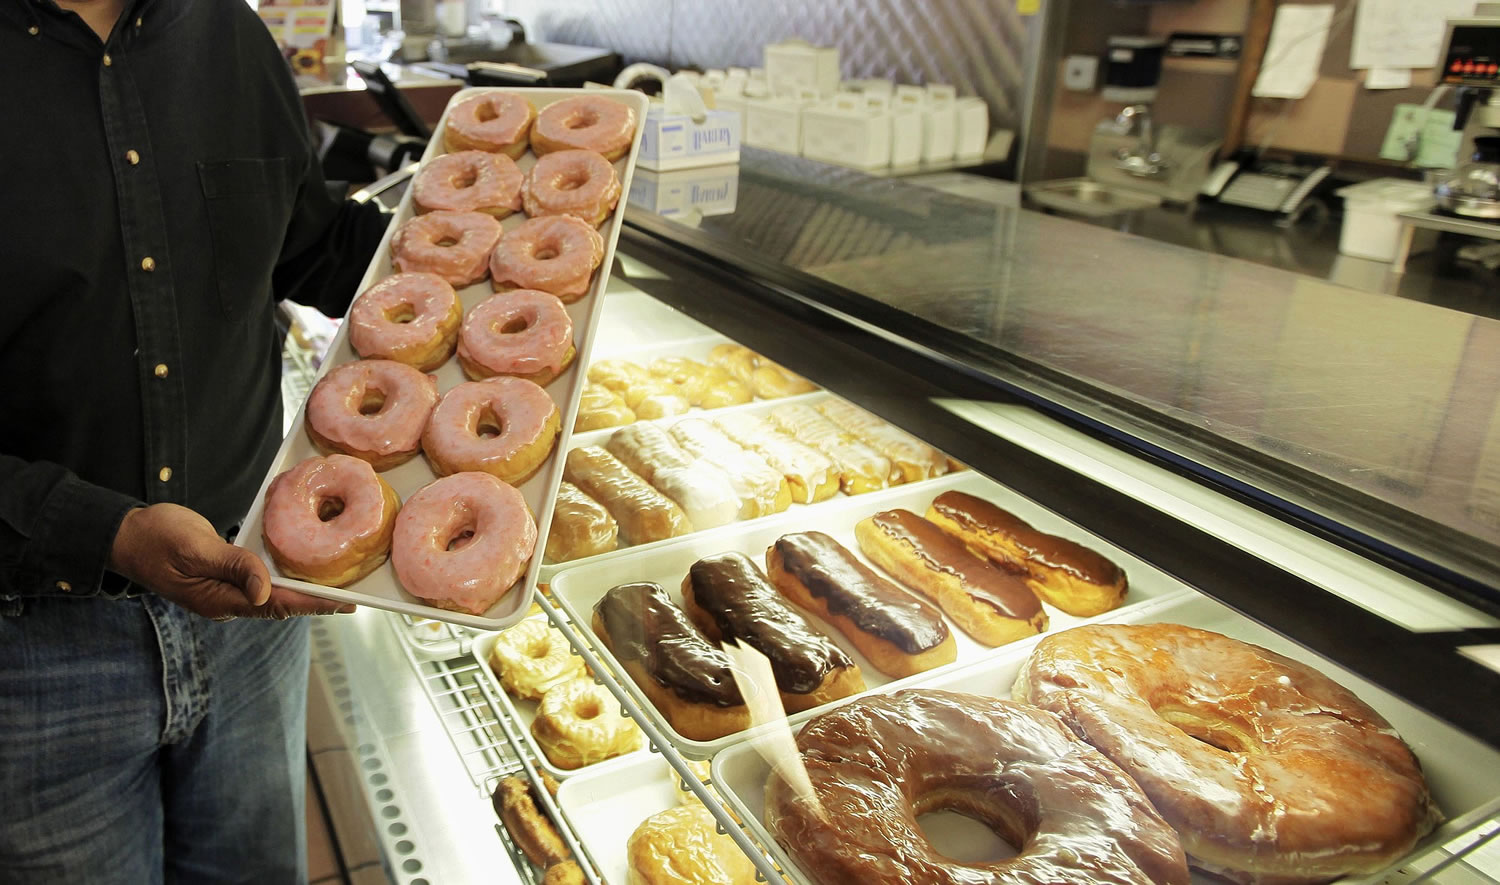 Associated Press files
The Obama administration is cracking down on artificial trans fats, calling them a threat to public health.
Among the foods that still have them are refrigerated dough, vegetable shortenings and stick margarines.